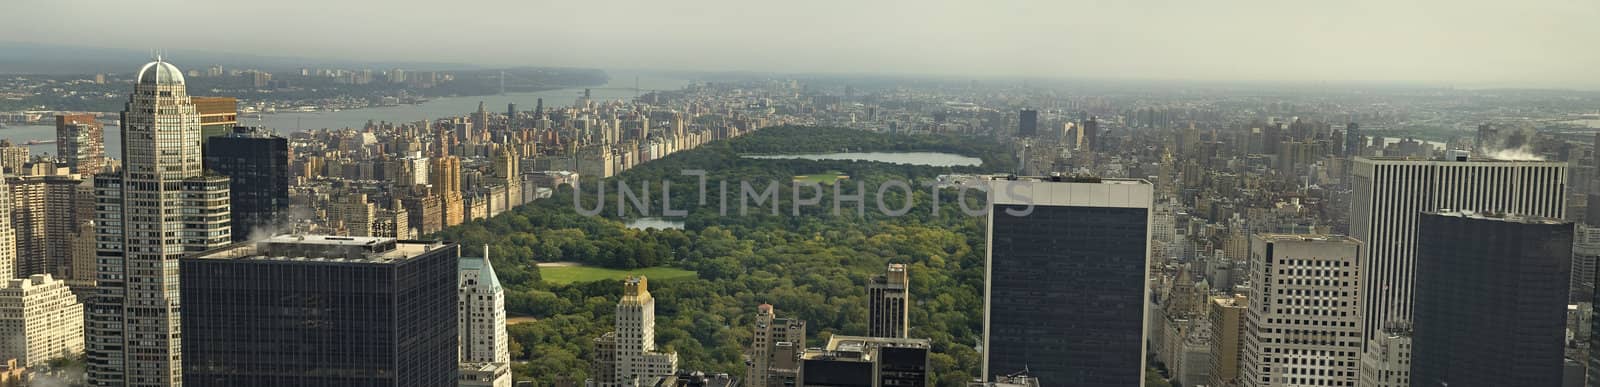 central park by rorem